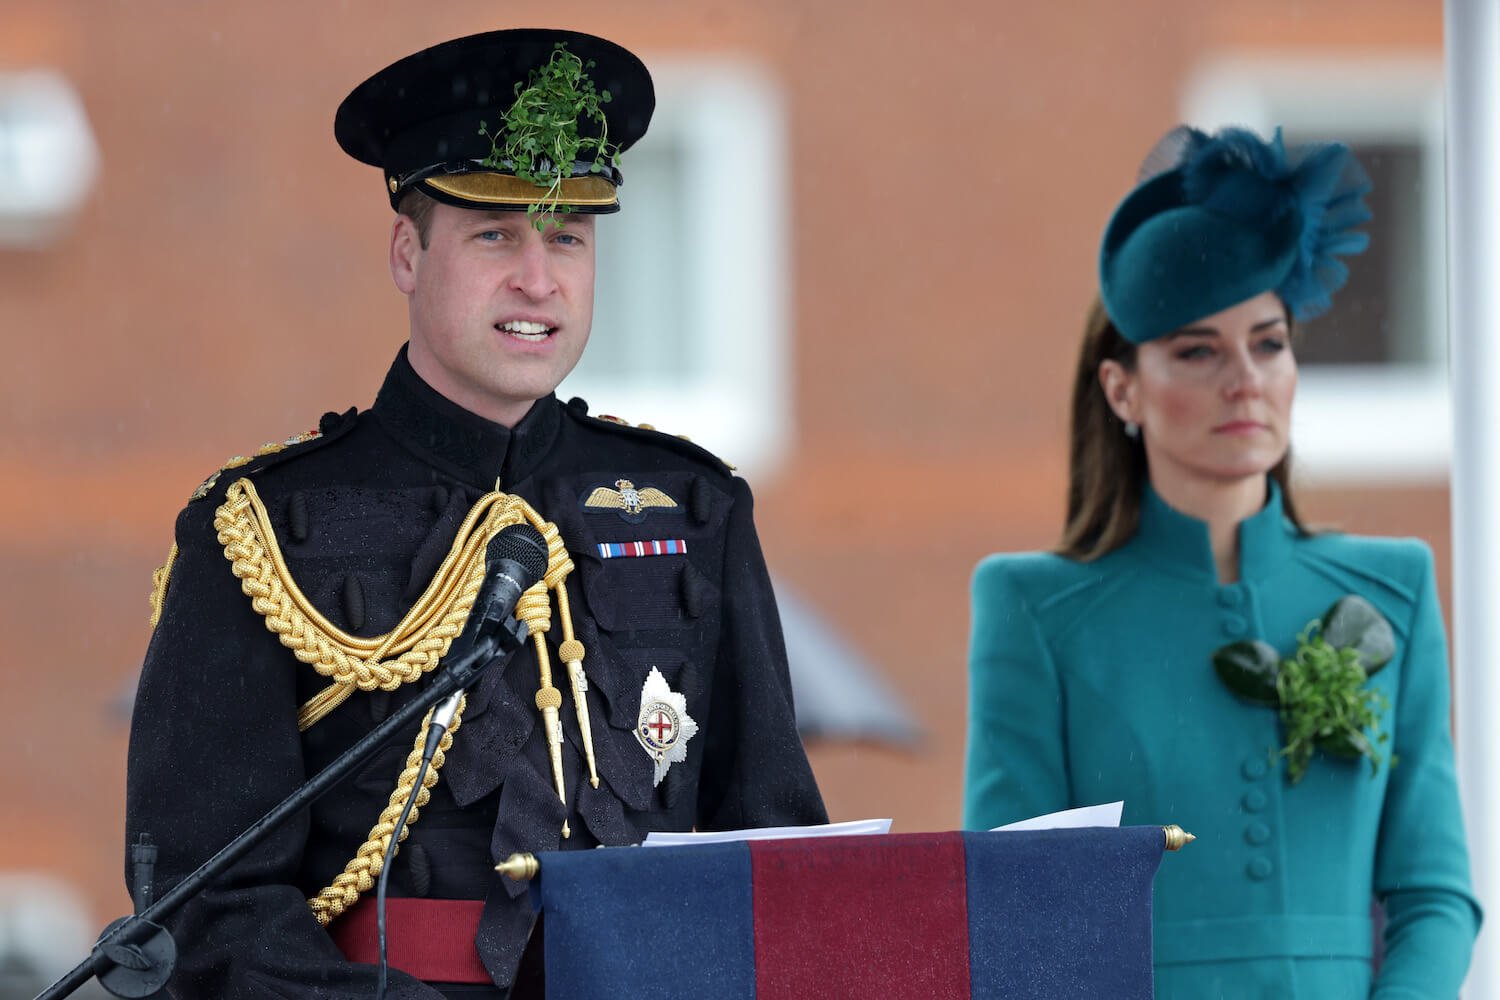 Prince William praises wife Kate Middleton while wearing a uniform